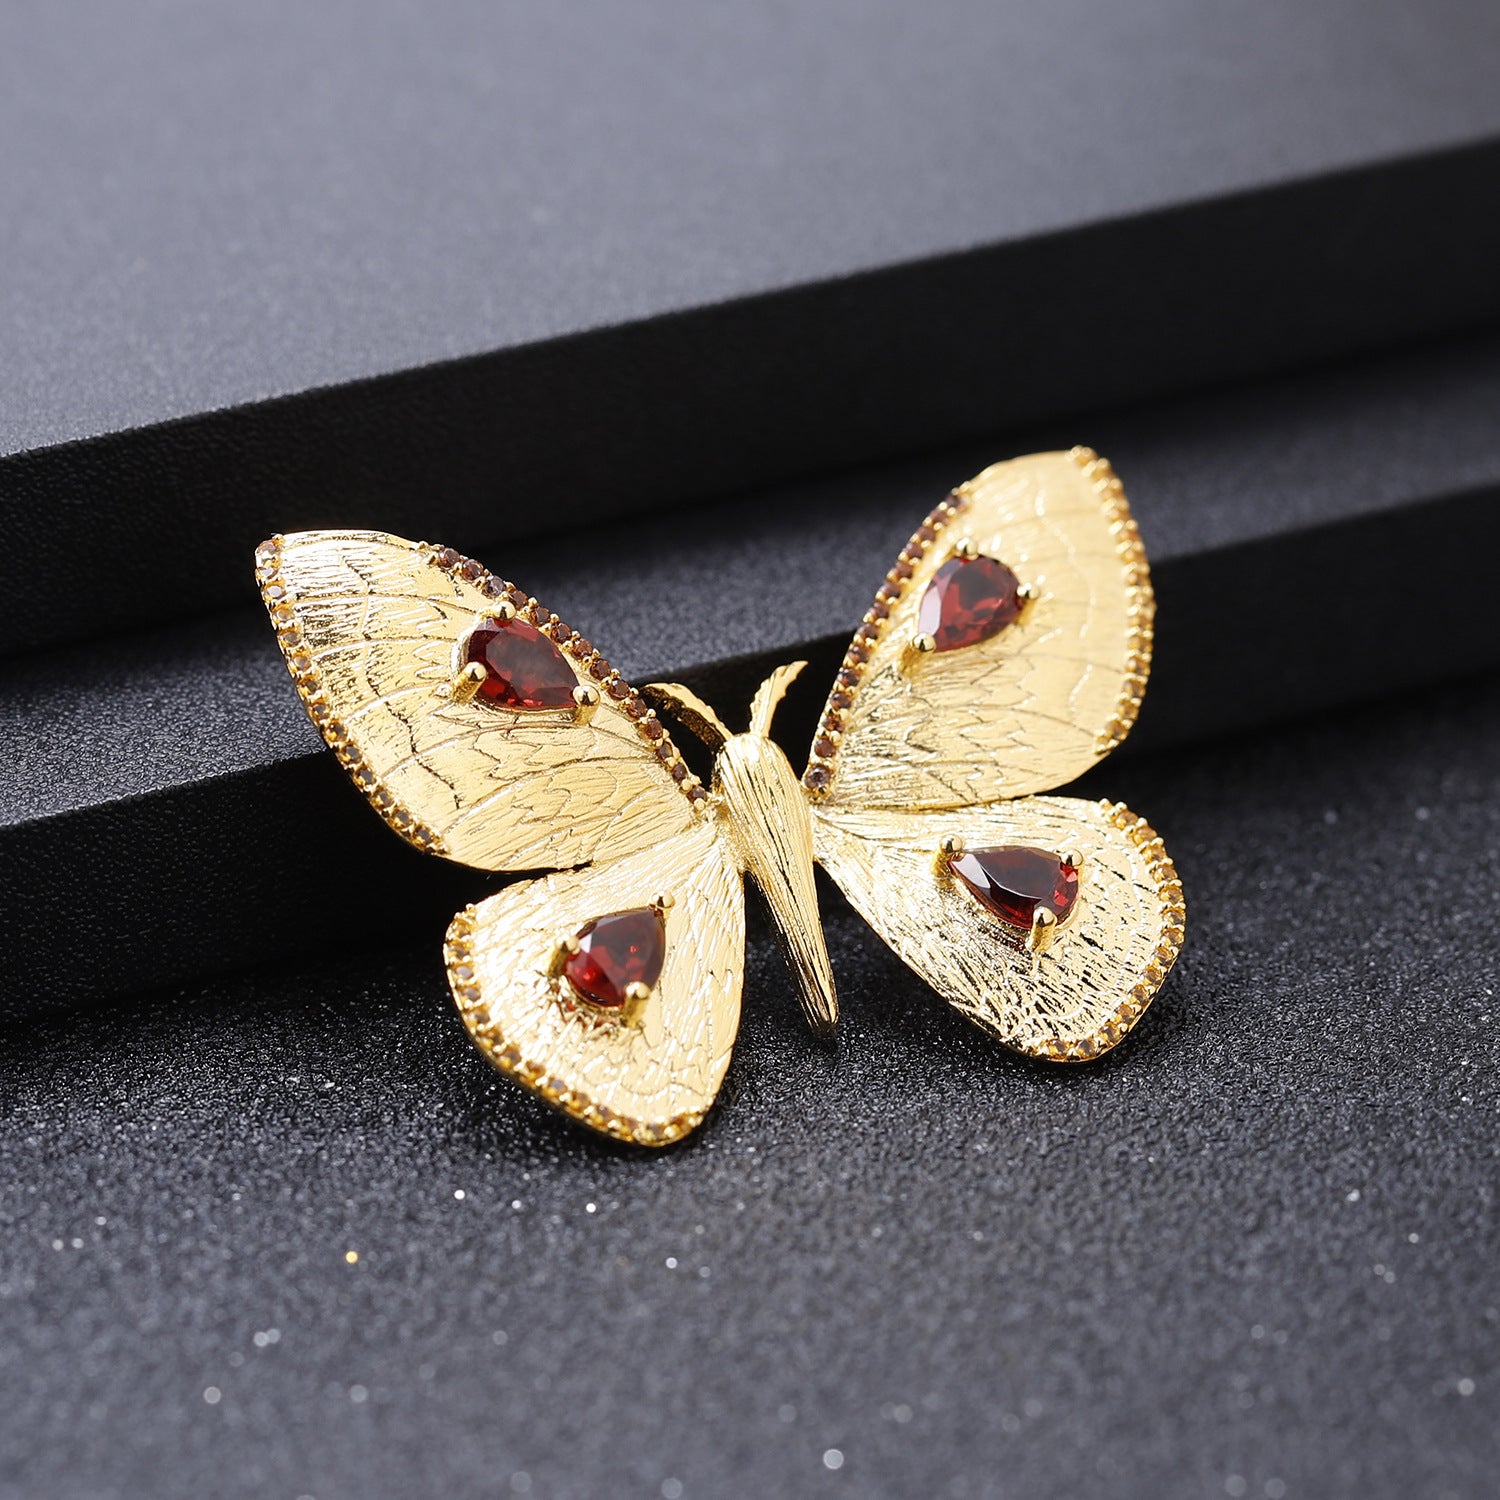 Palace Style Inlaid Colourful Gemstones Brooch Pendant Dual-use Design Butterfly Silver Necklace Pendant for Women